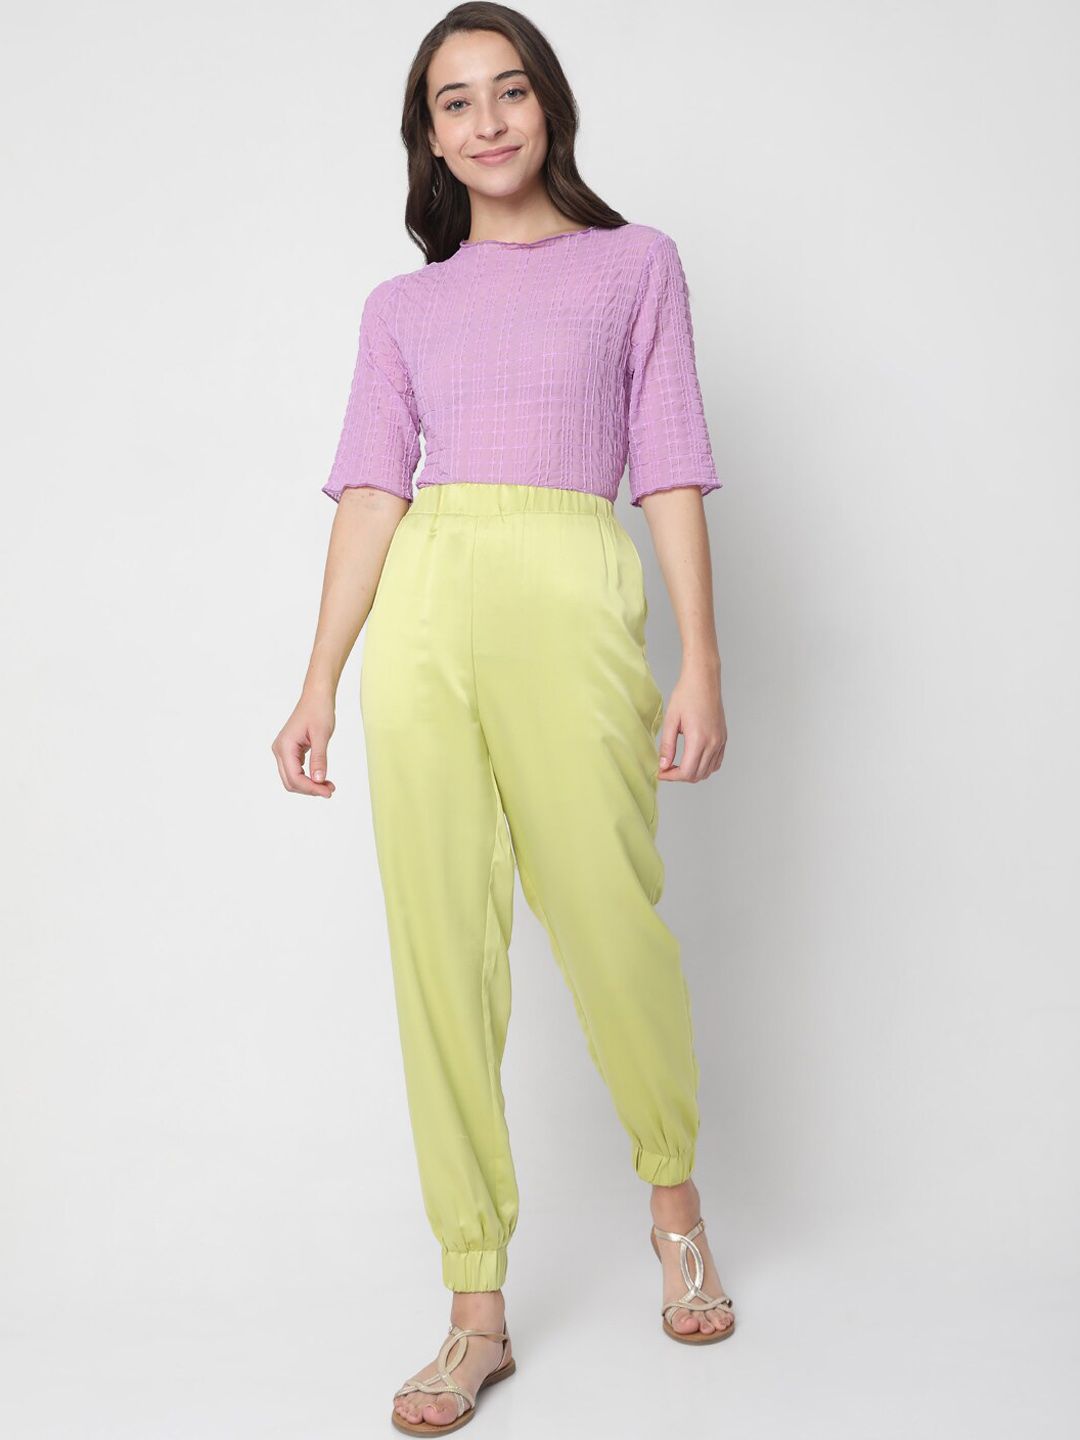 Vero Moda Women Lime Green Slim Fit High-Rise Trousers Price in India